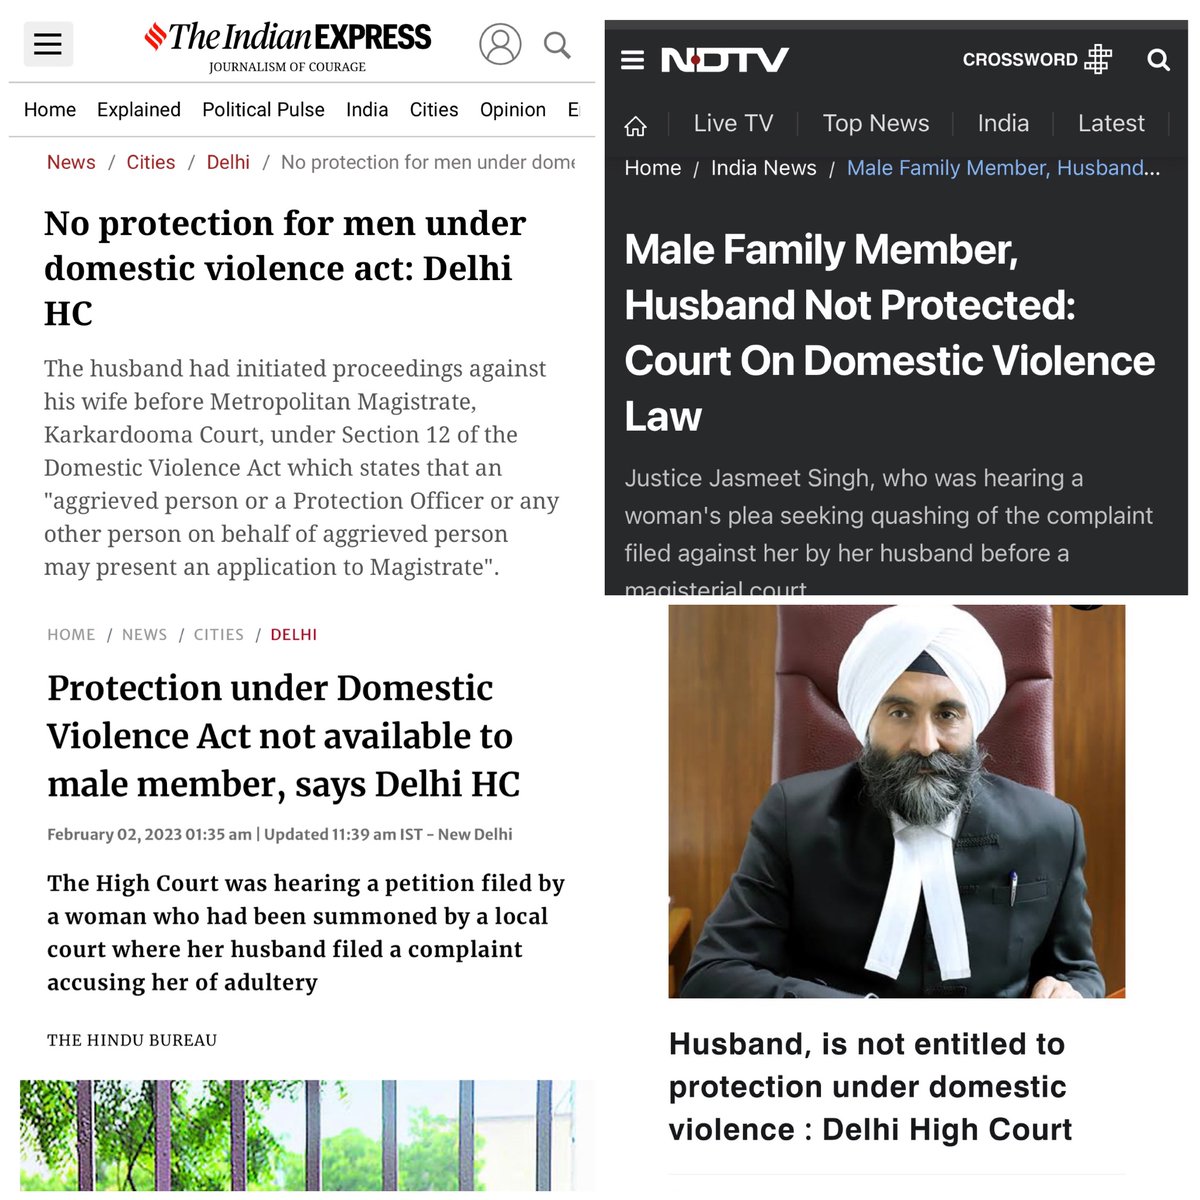 When will #SupremeCourt  understand that laws should protect citizens, not force them to suicide.
We request to think abt Indian #MenToo 
Legal system cant take  stress of #FakeMaritalRapeCases 
Justice will be denied if this women-centric law is passed...#Domesticviolencelaw